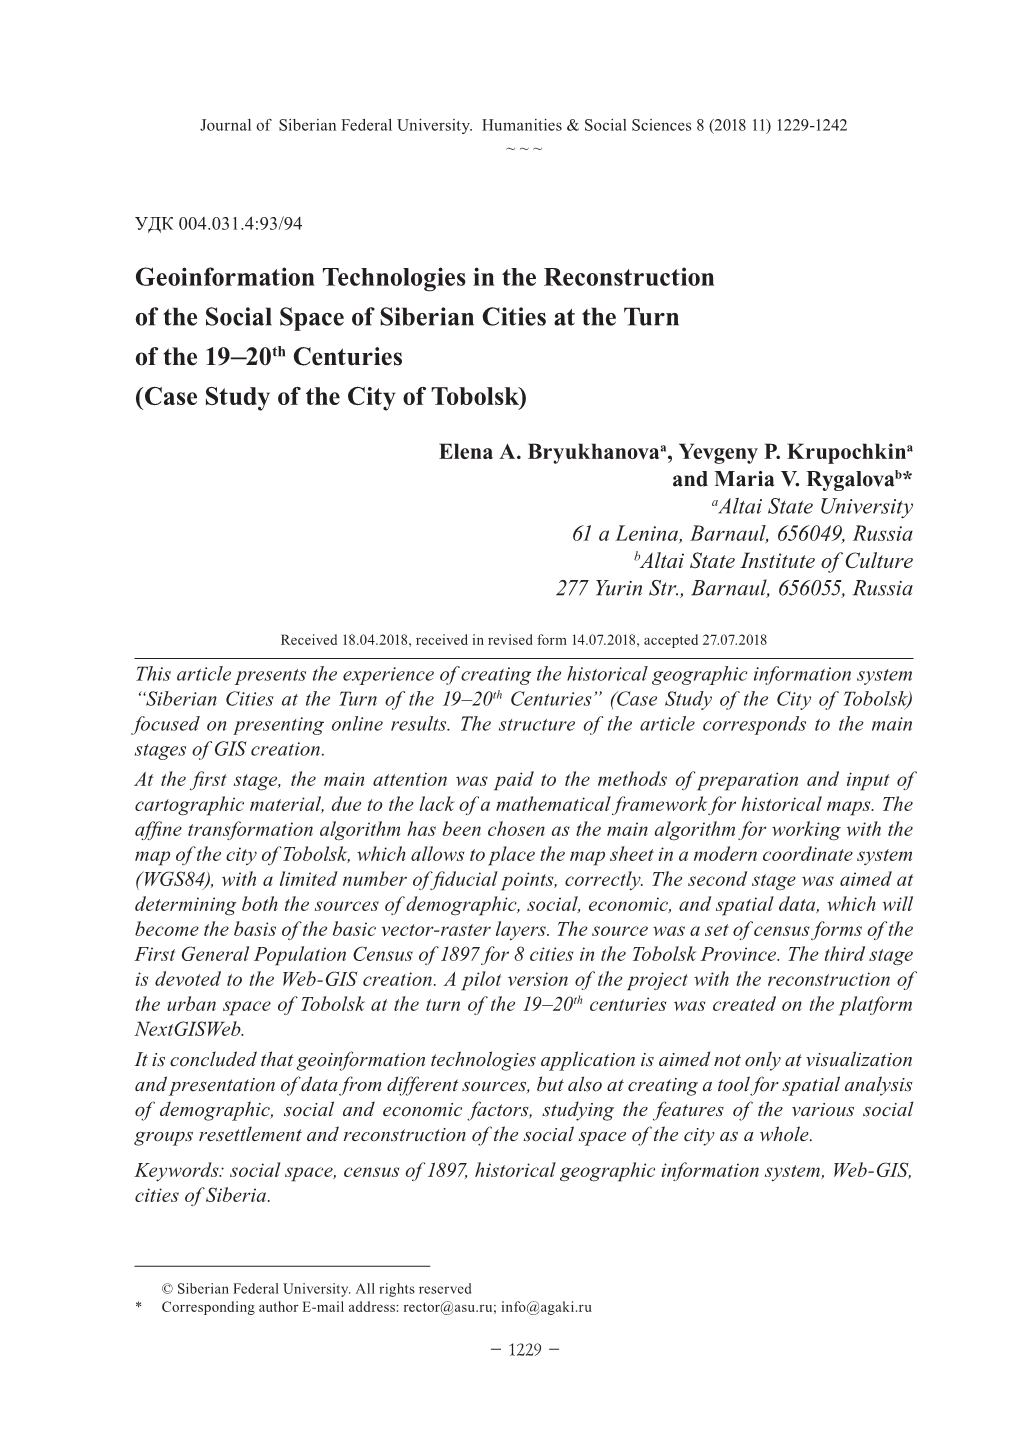 Geoinformation Technologies in the Reconstruction of the Social Space of Siberian Cities at the Turn of the 19–20Th Centuries (Case Study of the City of Tobolsk)